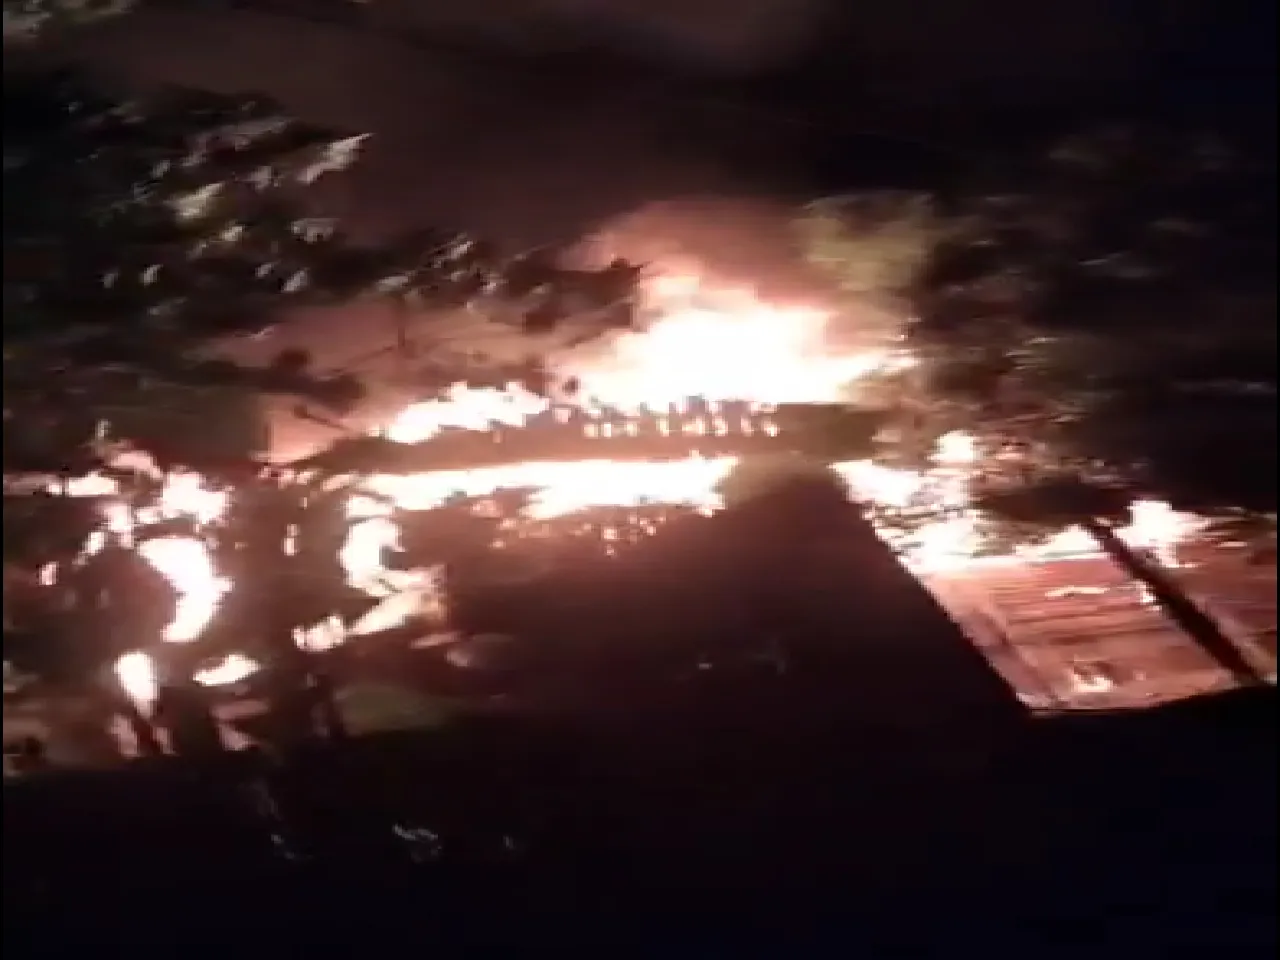 Houses burning in the night- Another brutal video of Manipur is viral